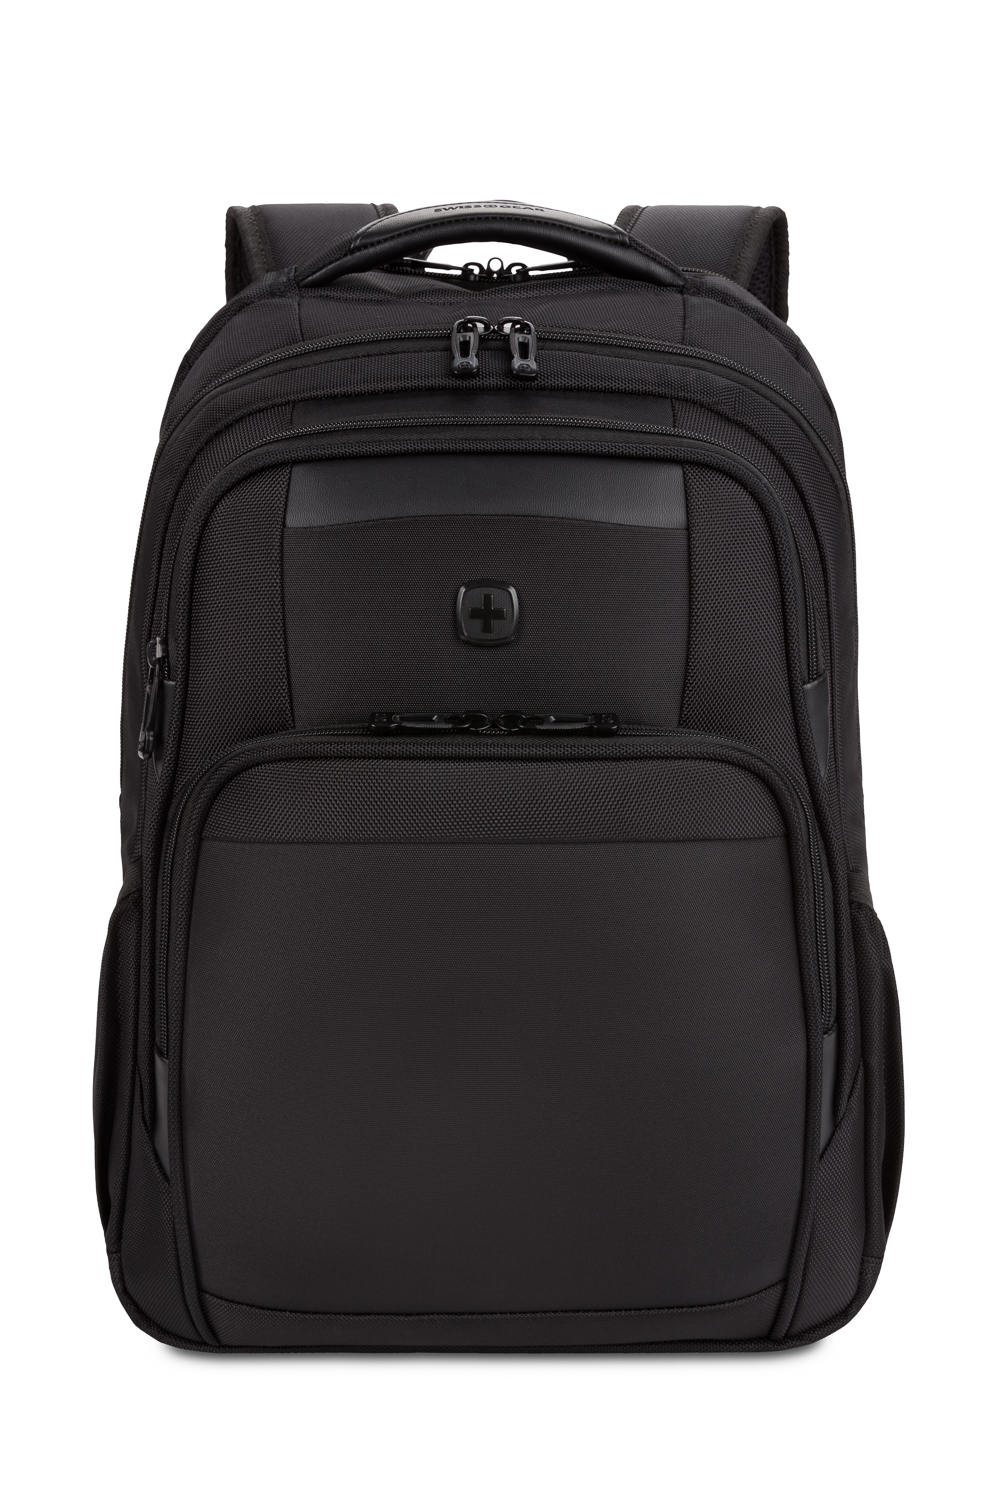 13 best laptop bags cases and backpacks from Billingham Samsonite and more